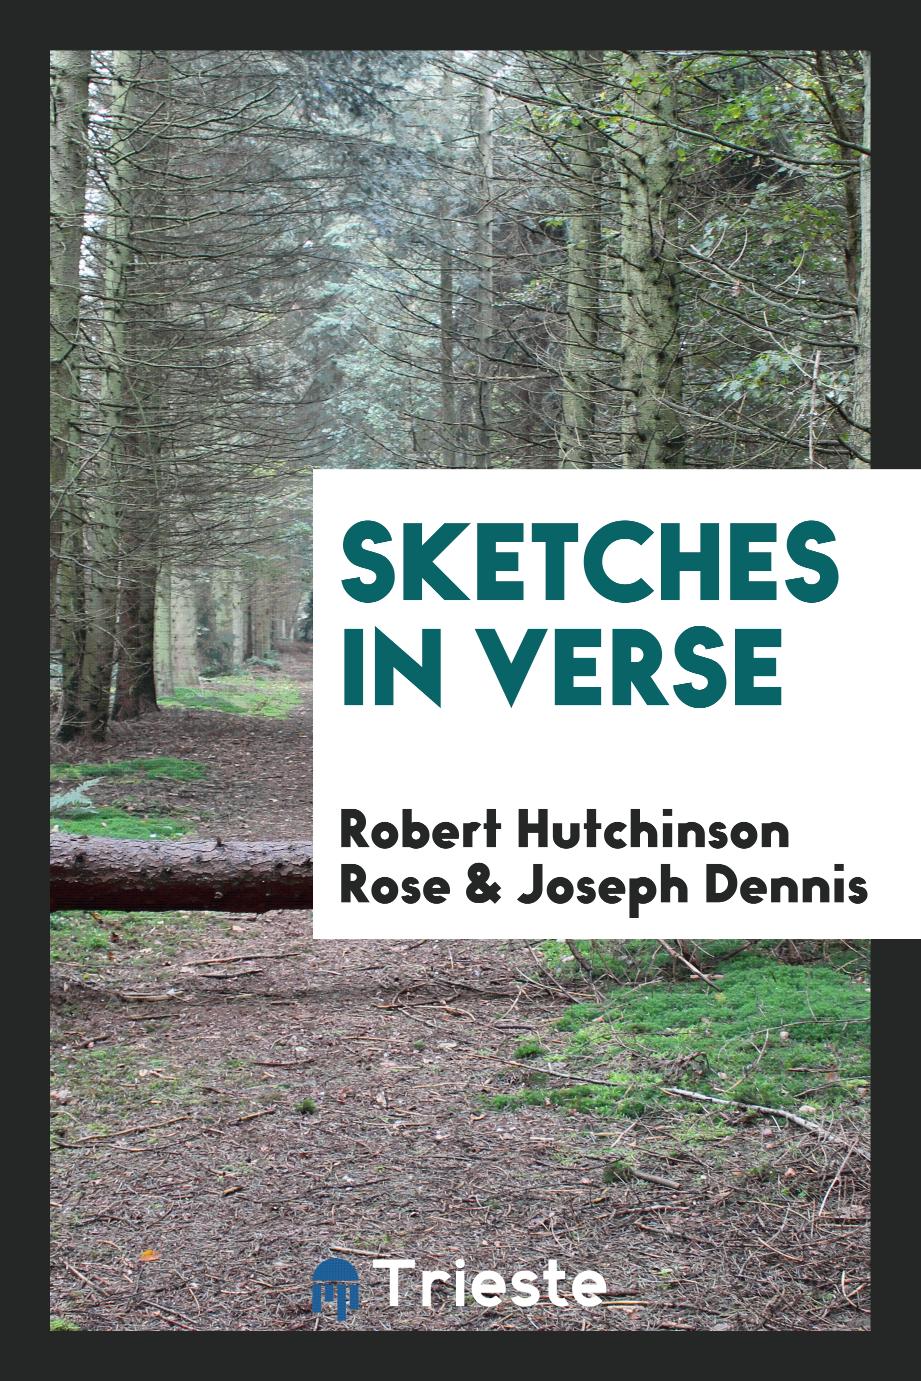 Sketches in verse